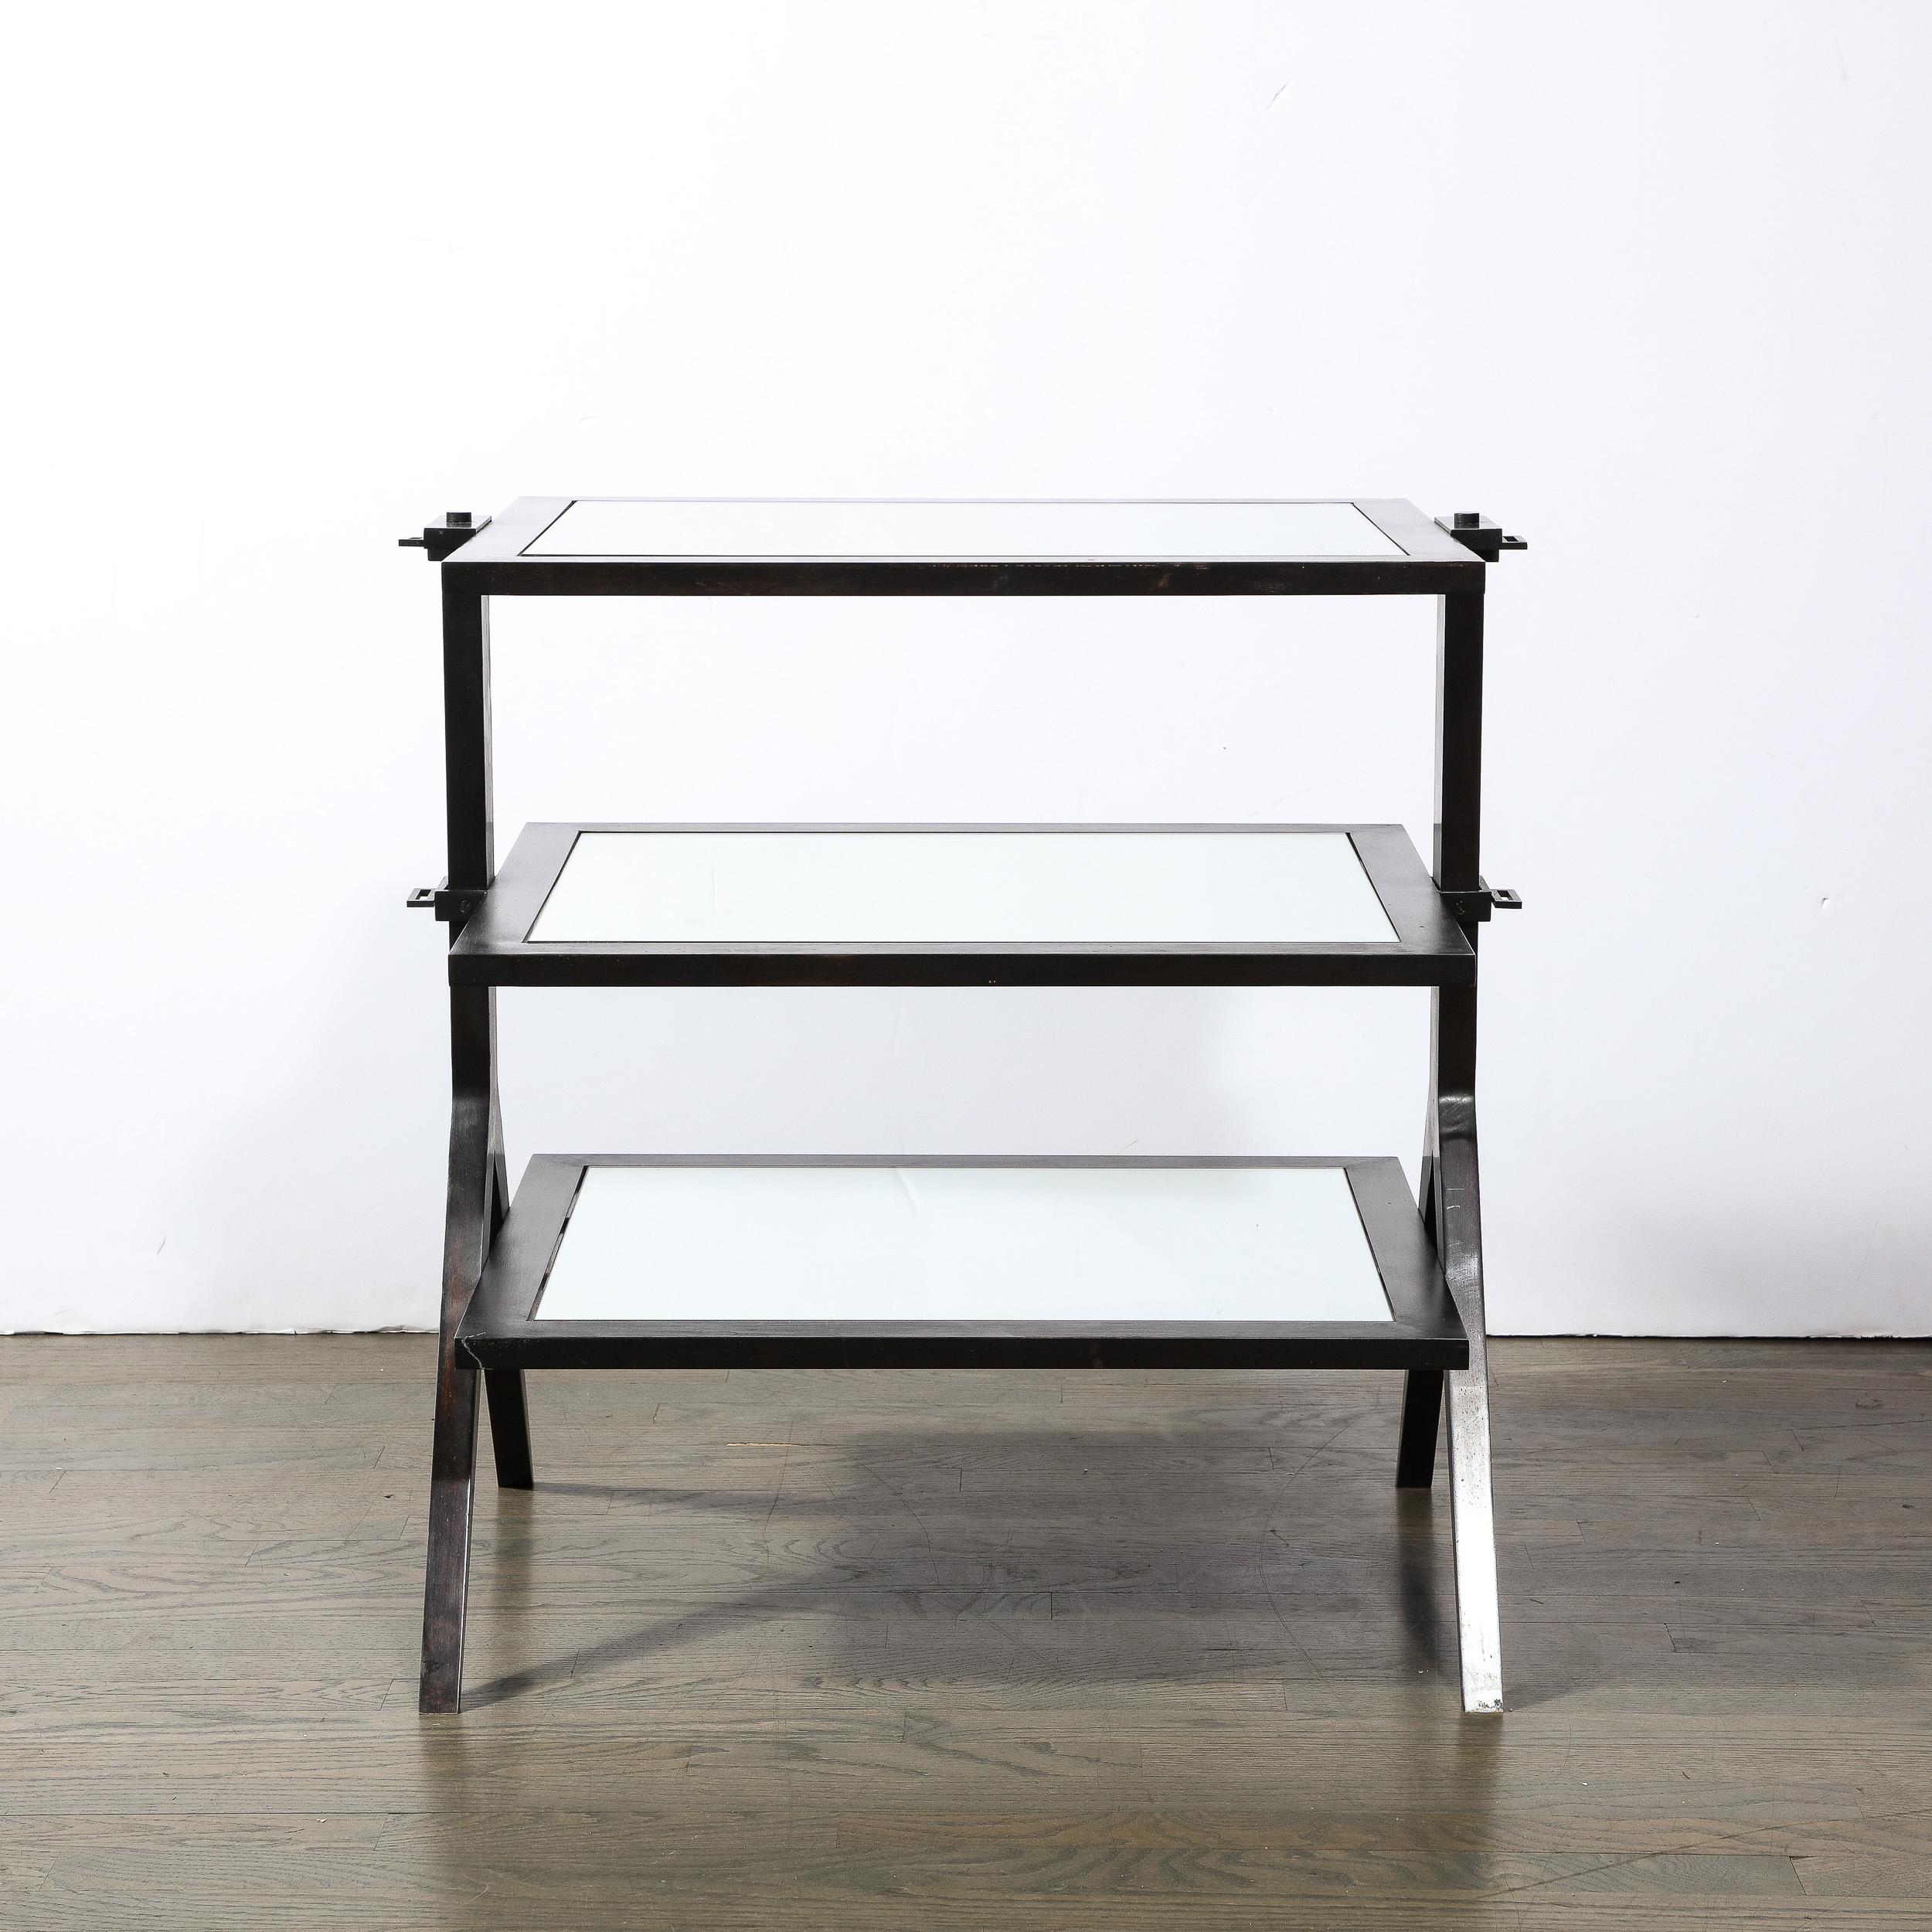 This sophisticated modernist three tier occasional table was realized in the United States circa 1990. It features three rectangular tiers with mirrored centers that adjoin to rectangular side supports that split into compass style tapered feet- all